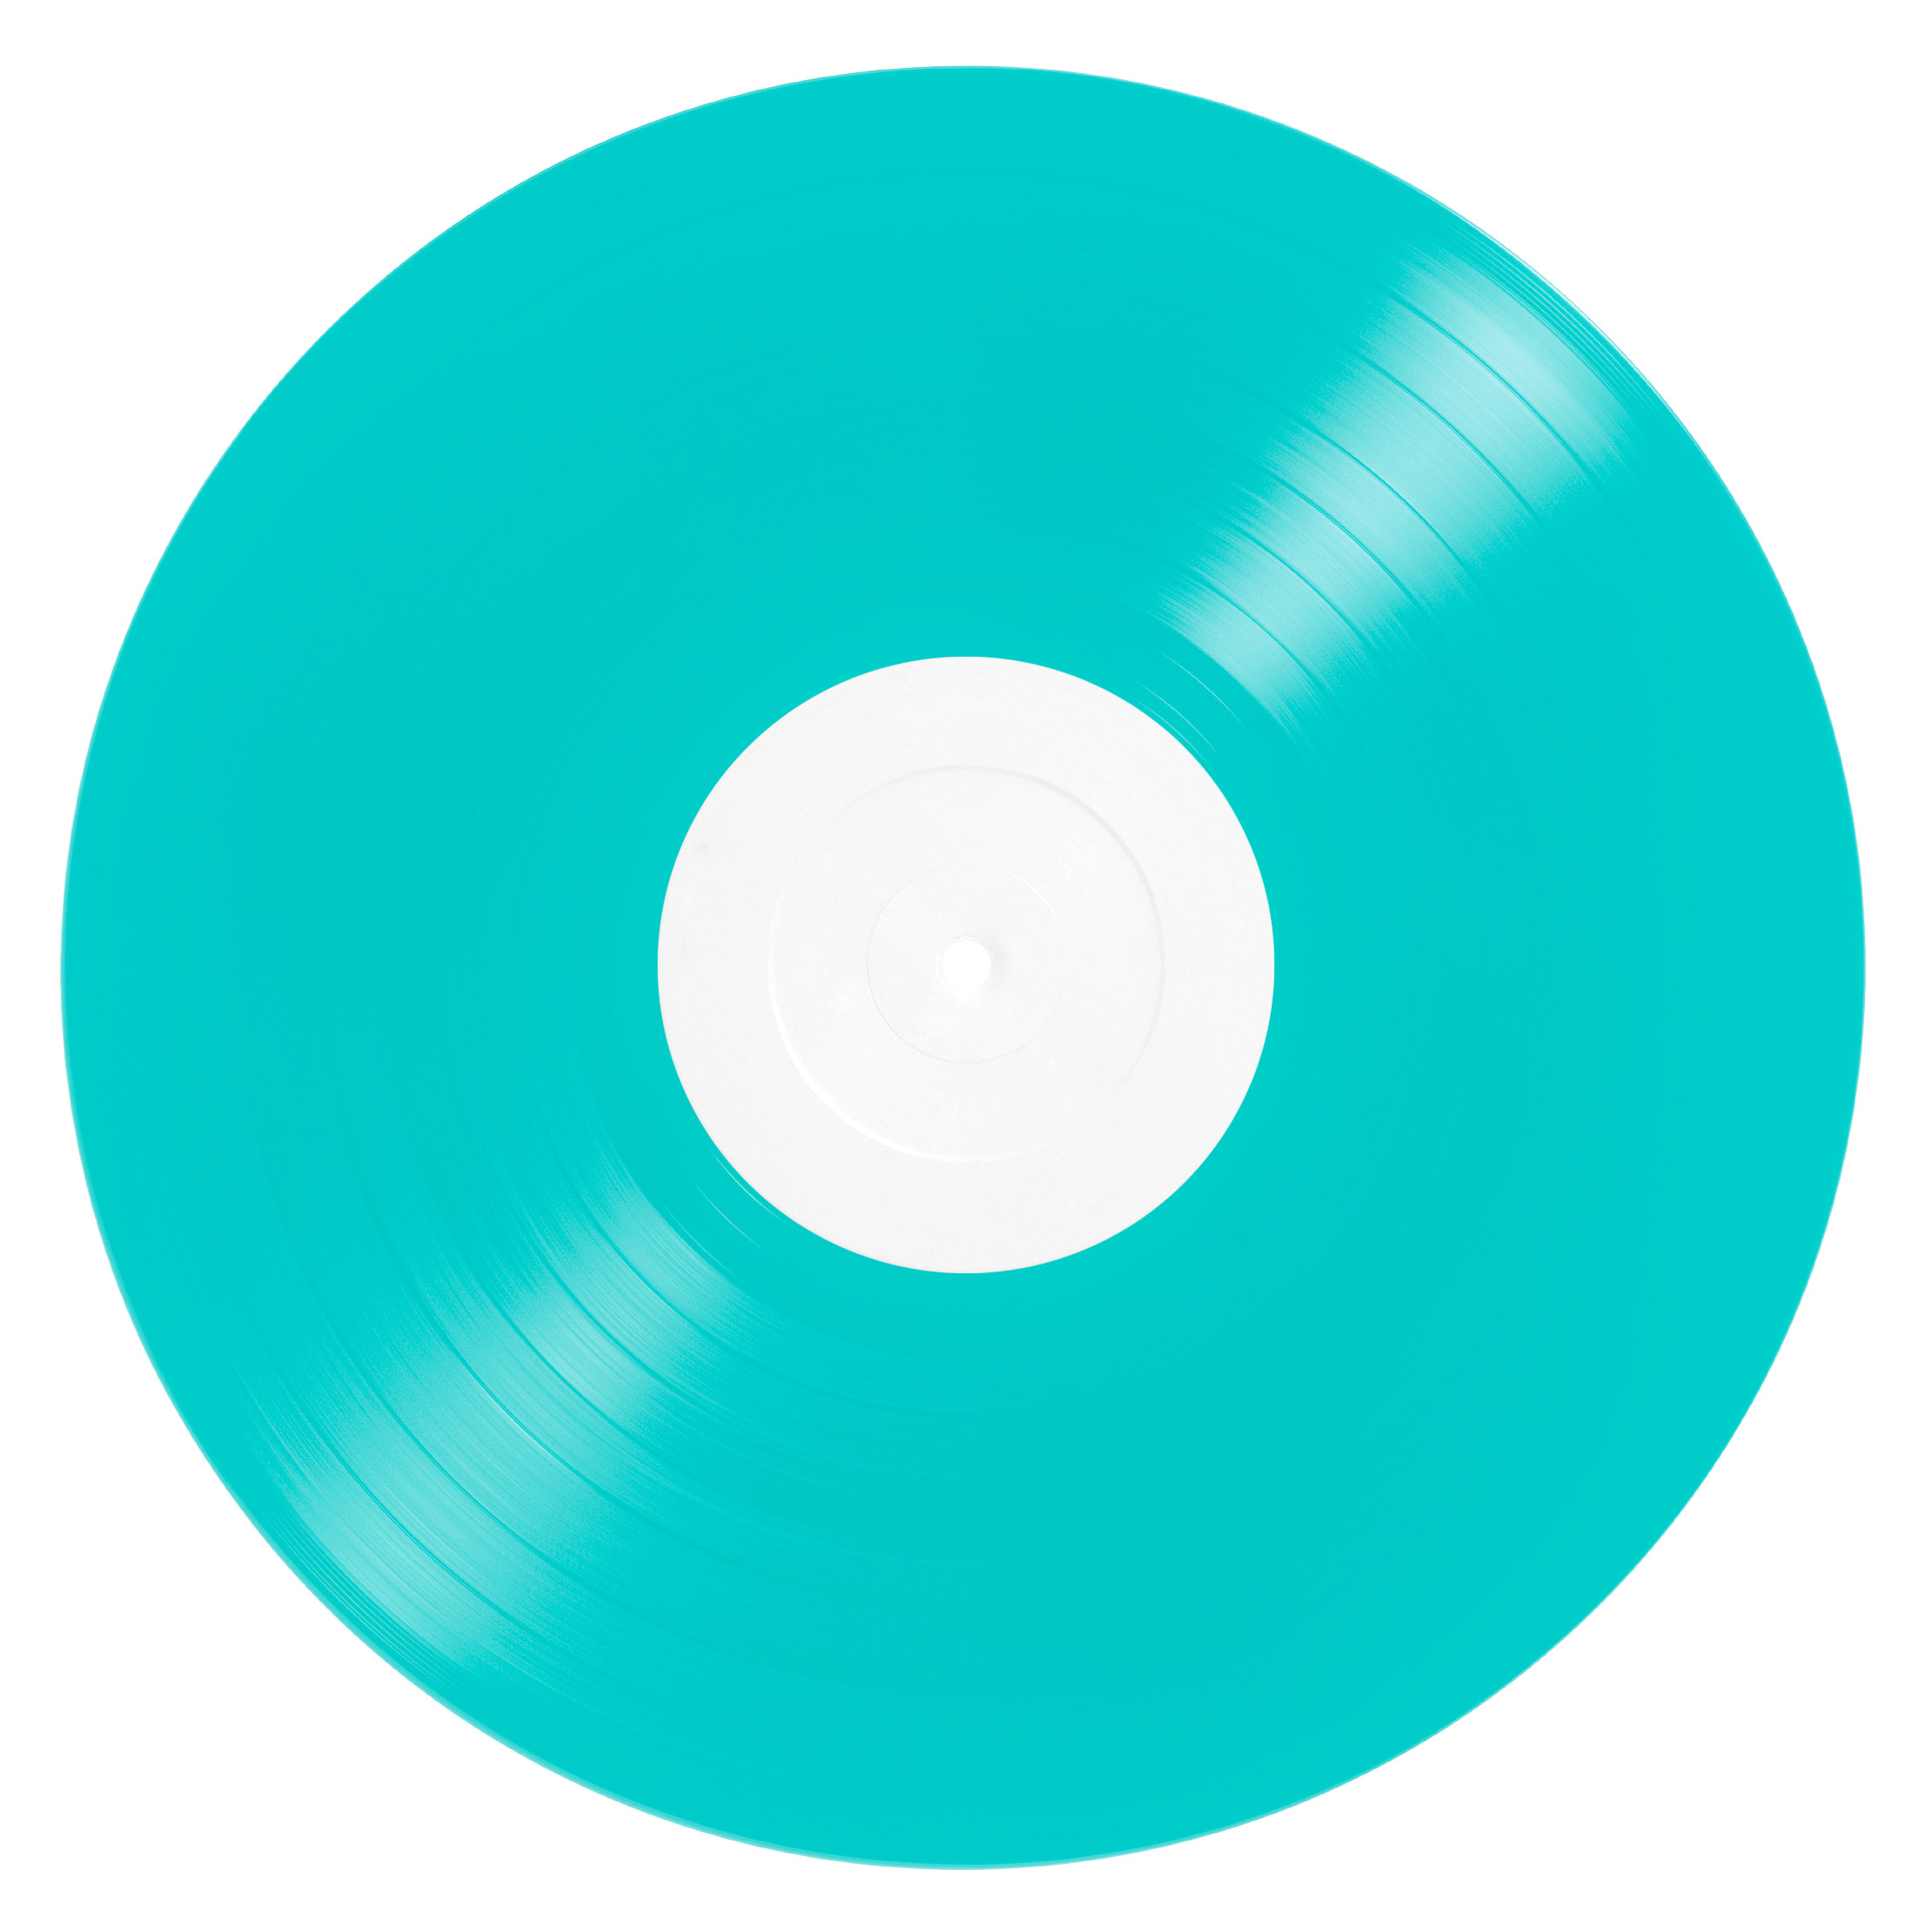 Shades of Clear – Furnace Record Pressing